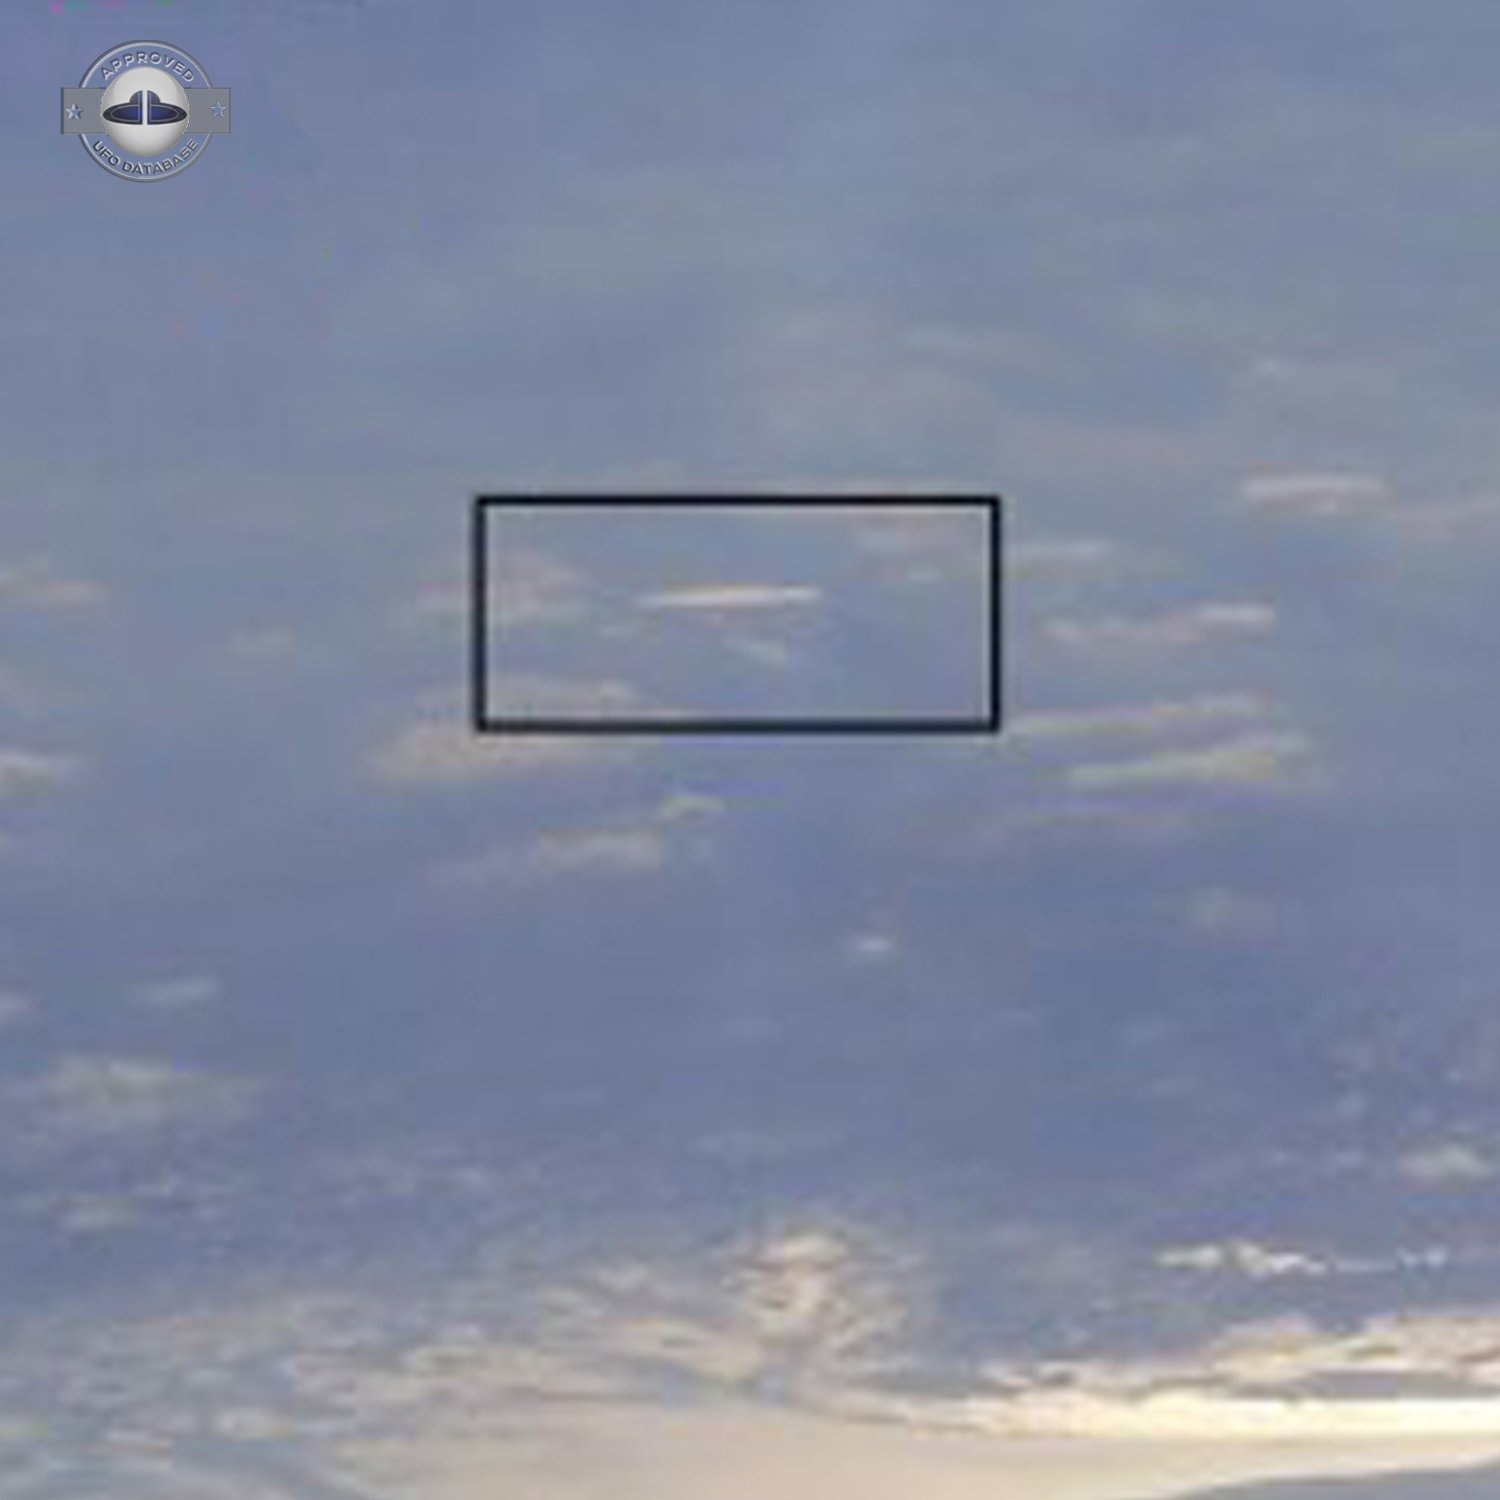 Black Sea UFO picture shot from Airplane | Turkey | January 10 2010 UFO Picture #207-3